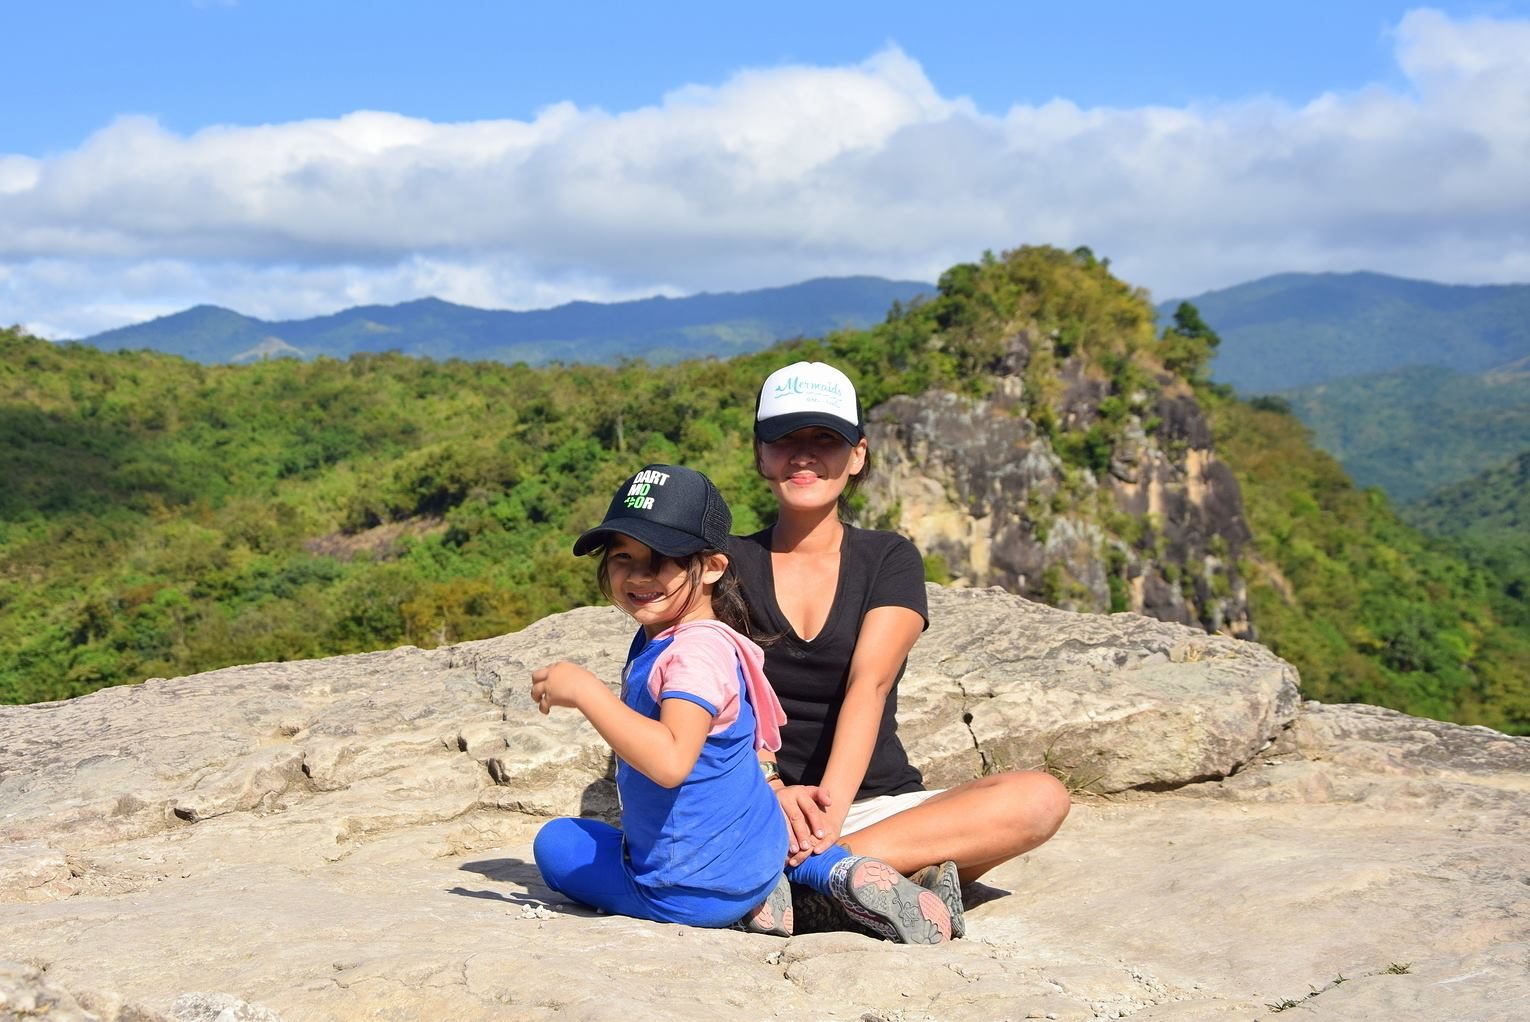 FUN AND SAFETY. You can go on adventures like mountain climbing while still mindful of safety. Gretchen Filart has been climbing mountains with Lia since the latter was just two years old. Photo courtesy of Gretchen Filart 